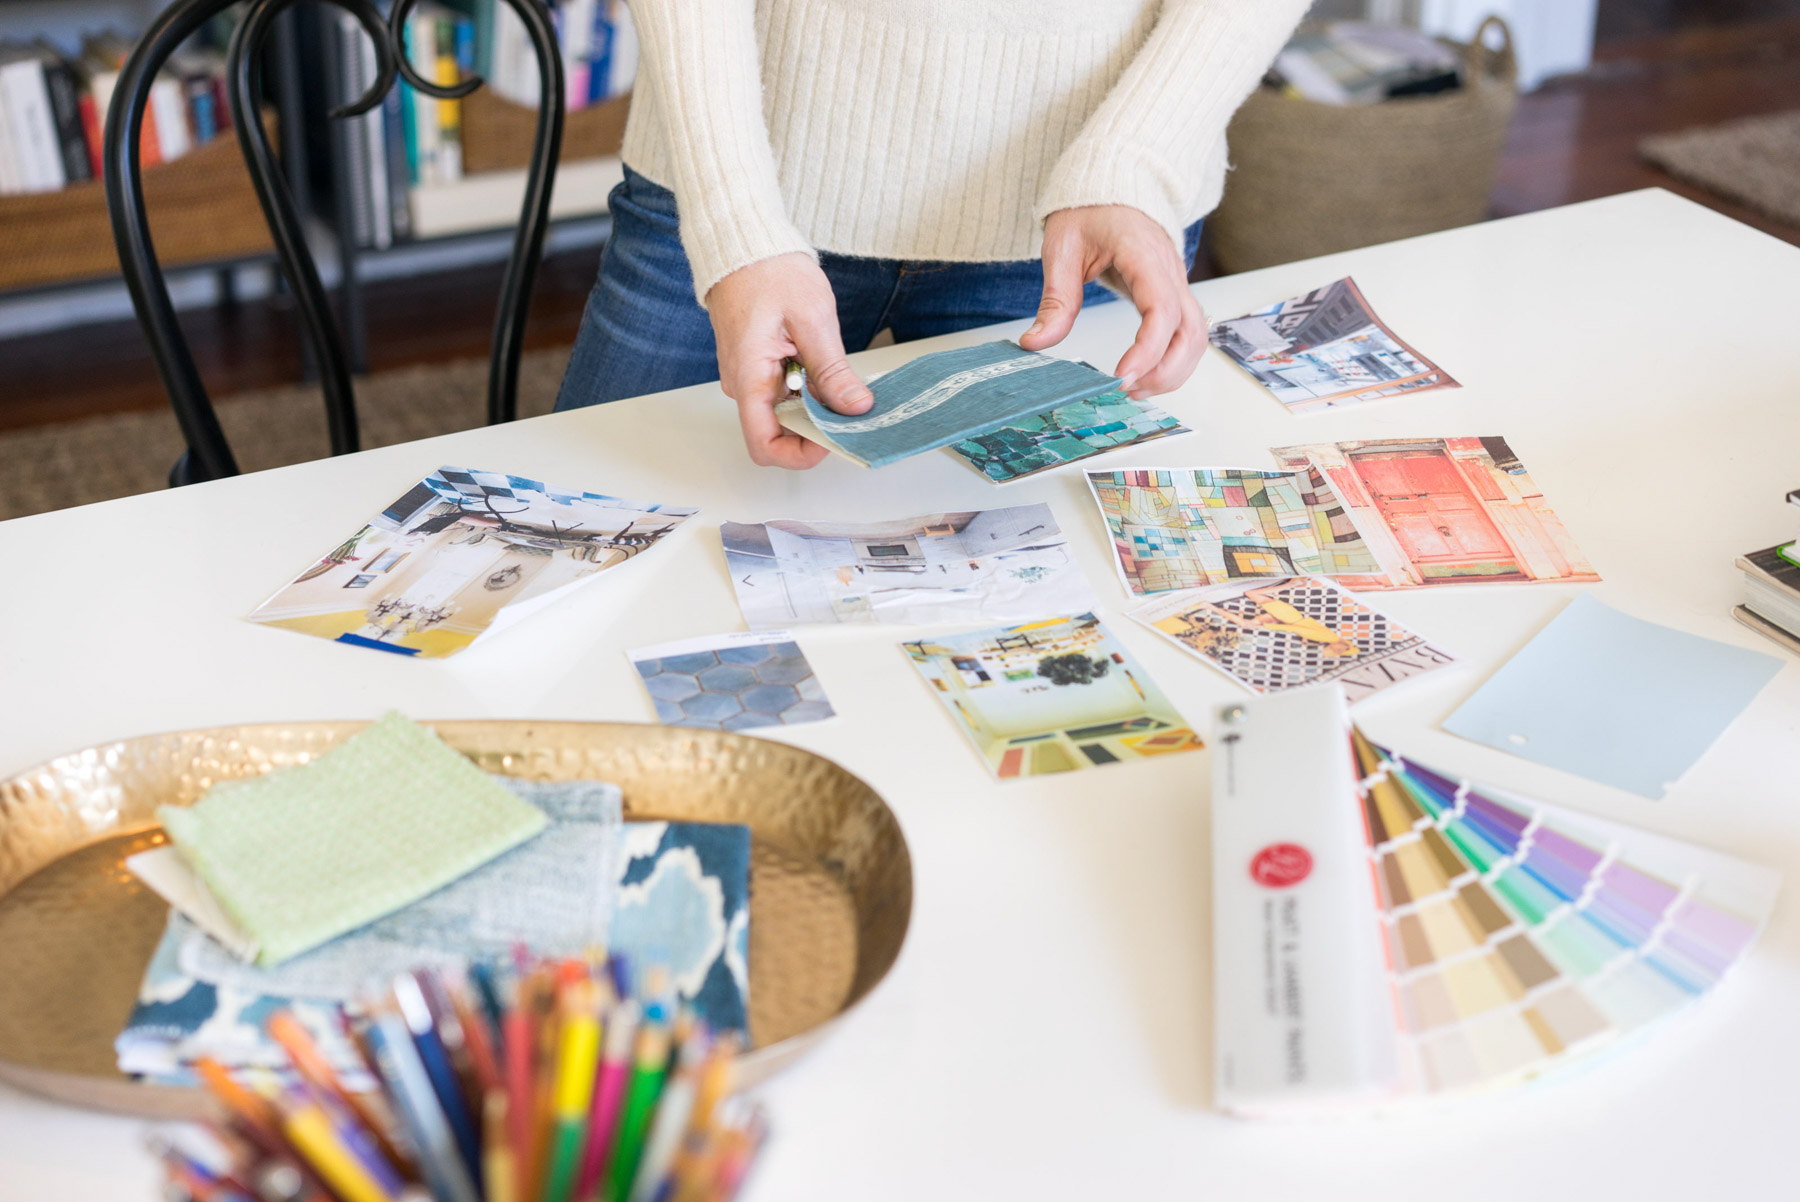 An interior designer sorts through fabric samples, paint colors, and inspiration images on her desk. 